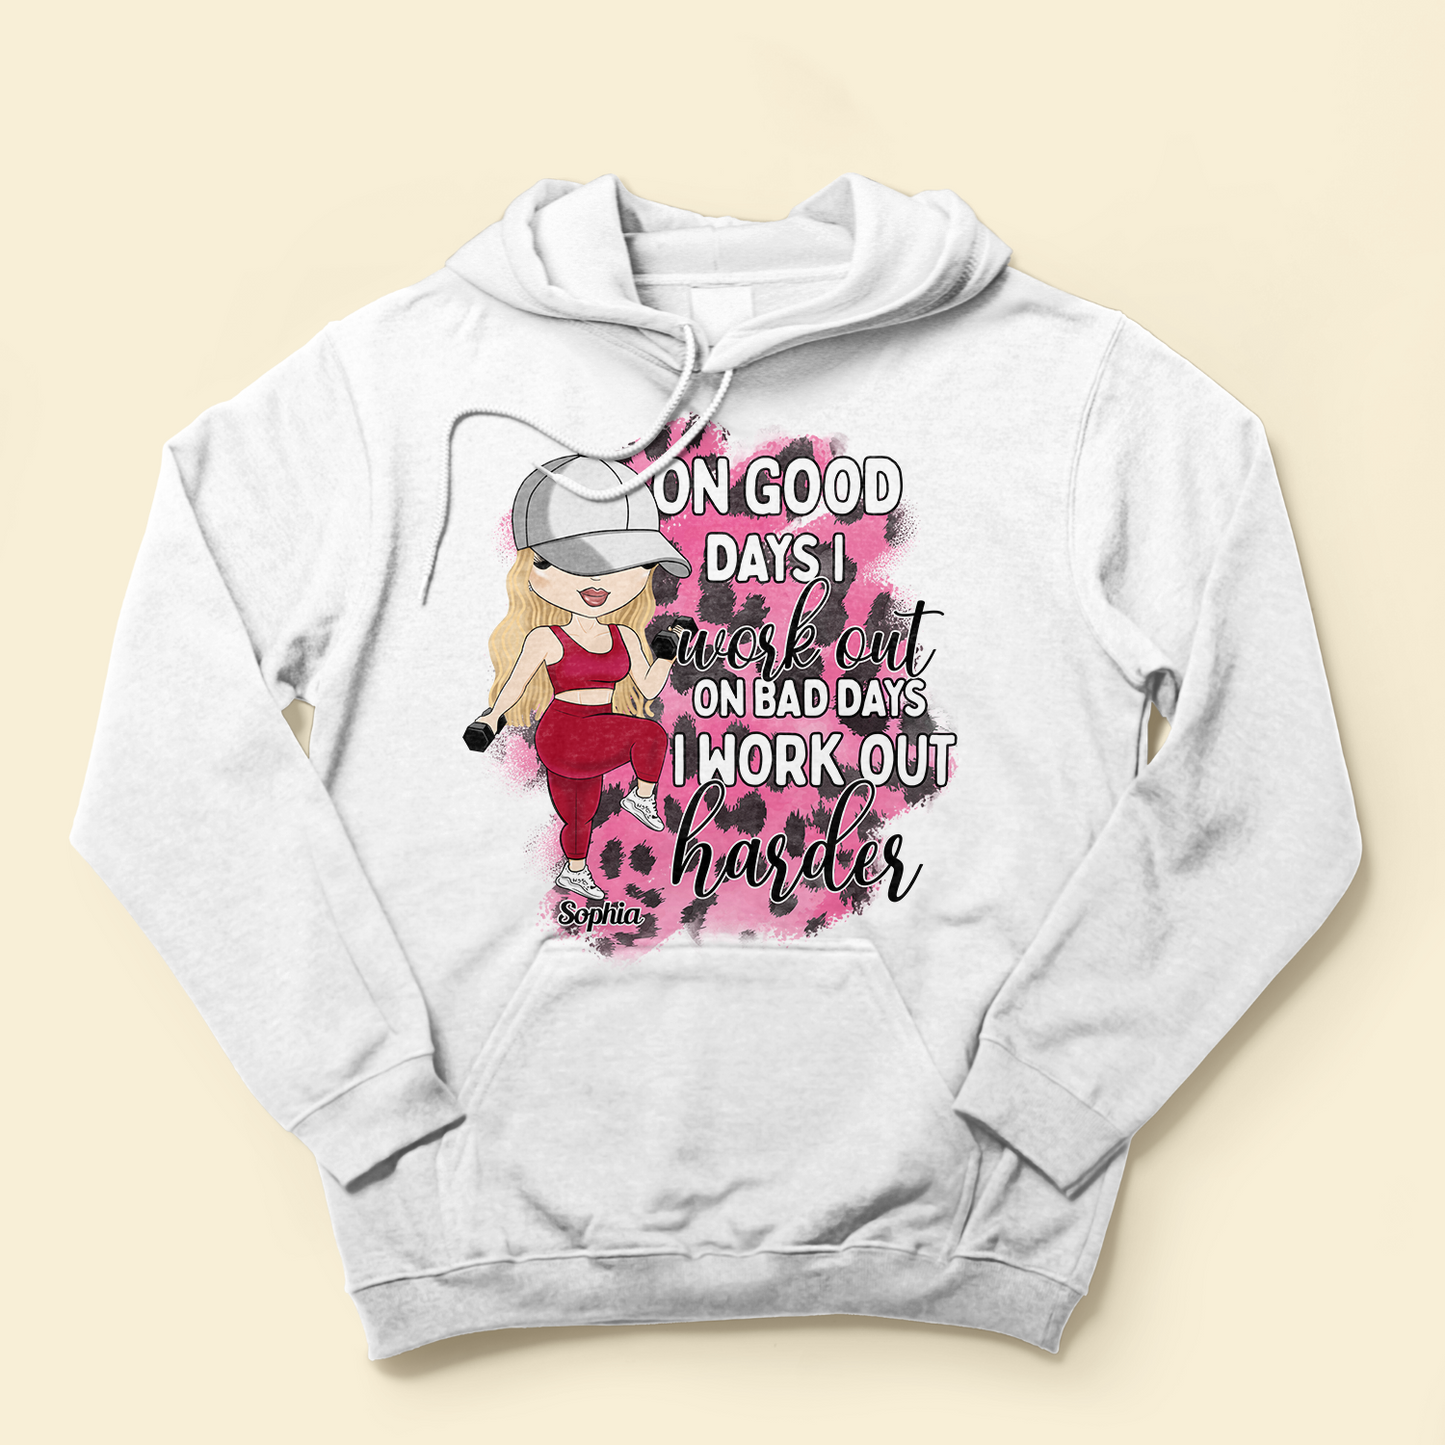 On Bad Days I Work Out Harder - Personalized Shirt - Birthday Gift For Her, Gym Girl, Fitness Lover